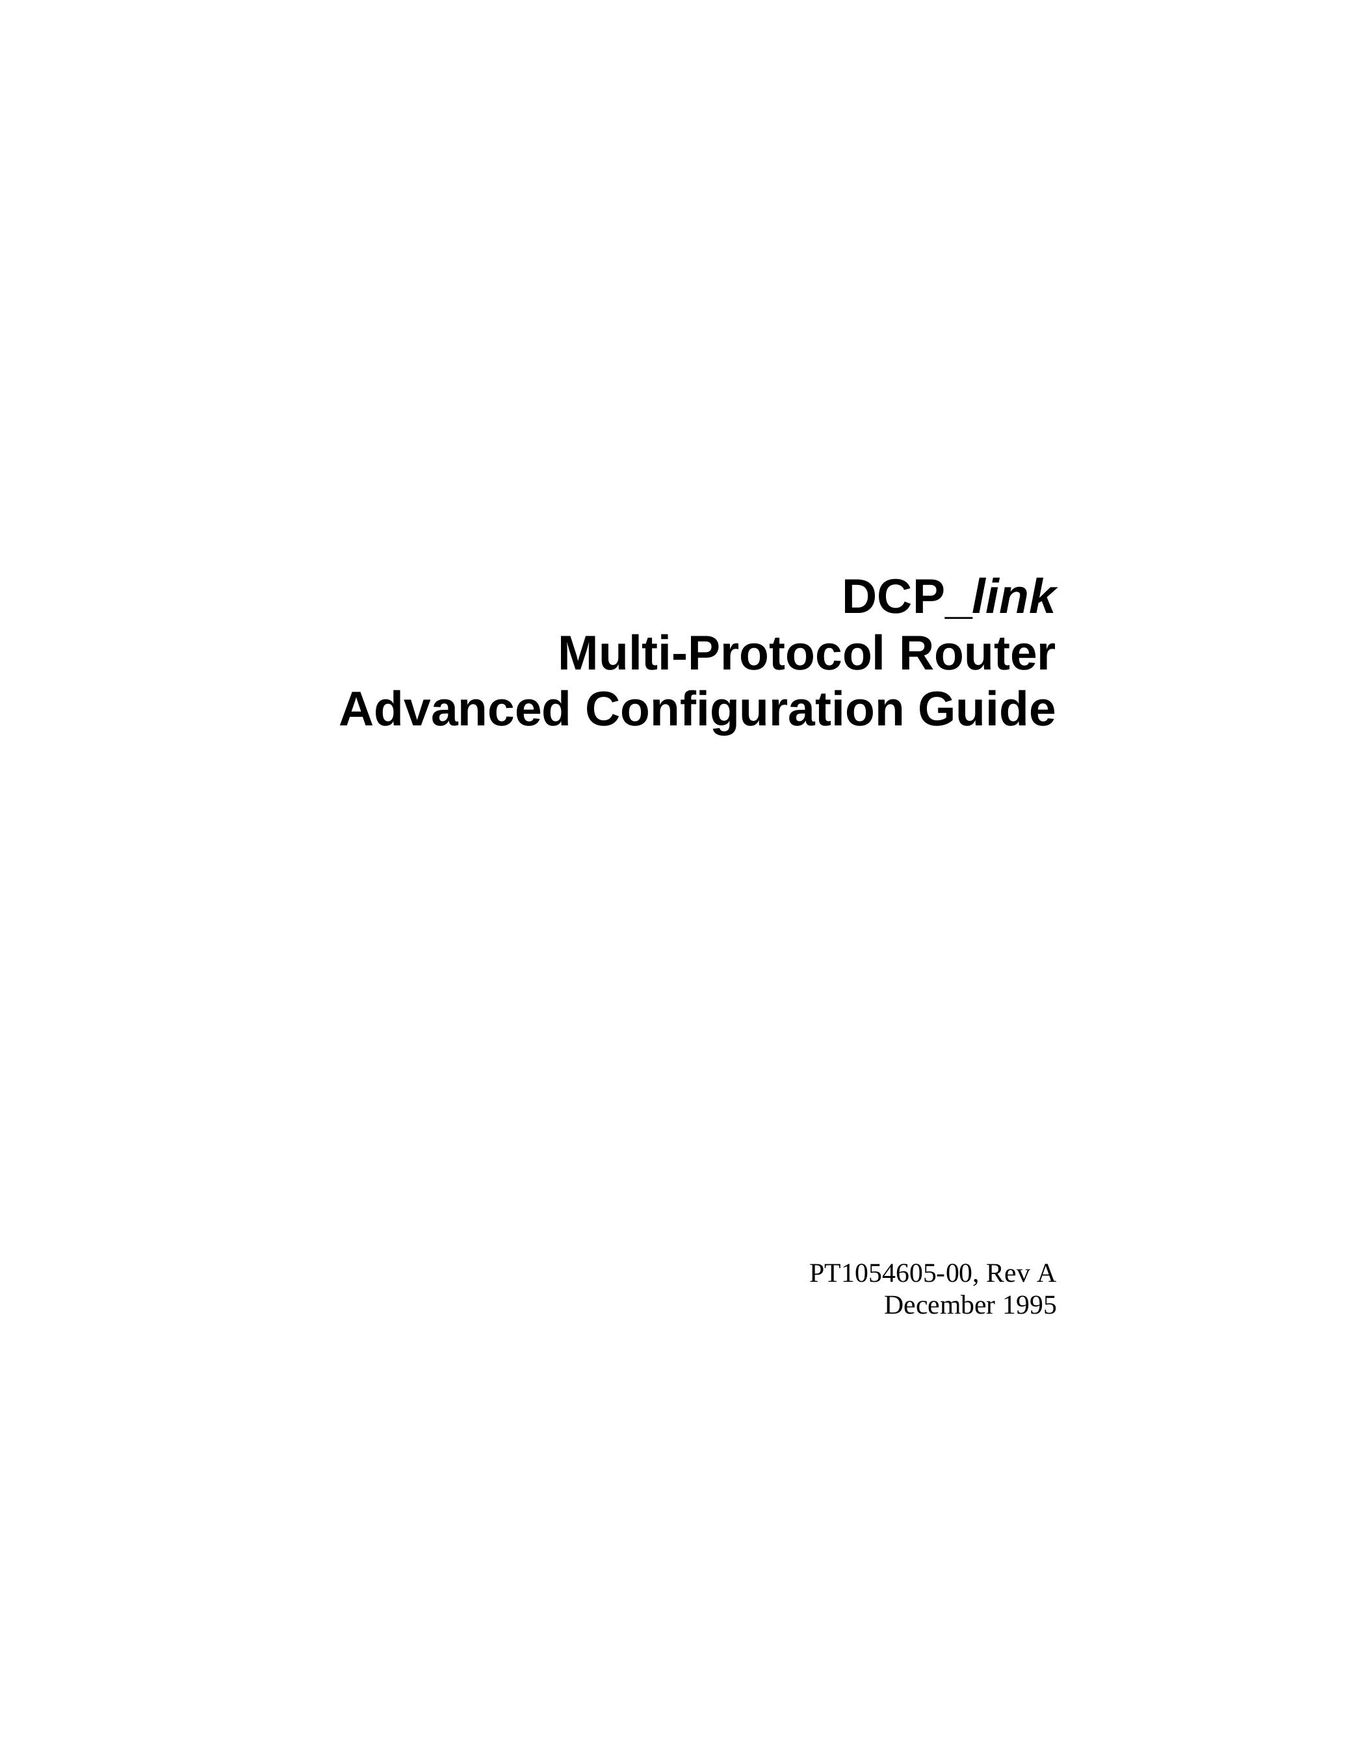 Emulex DCP_link Network Router User Manual